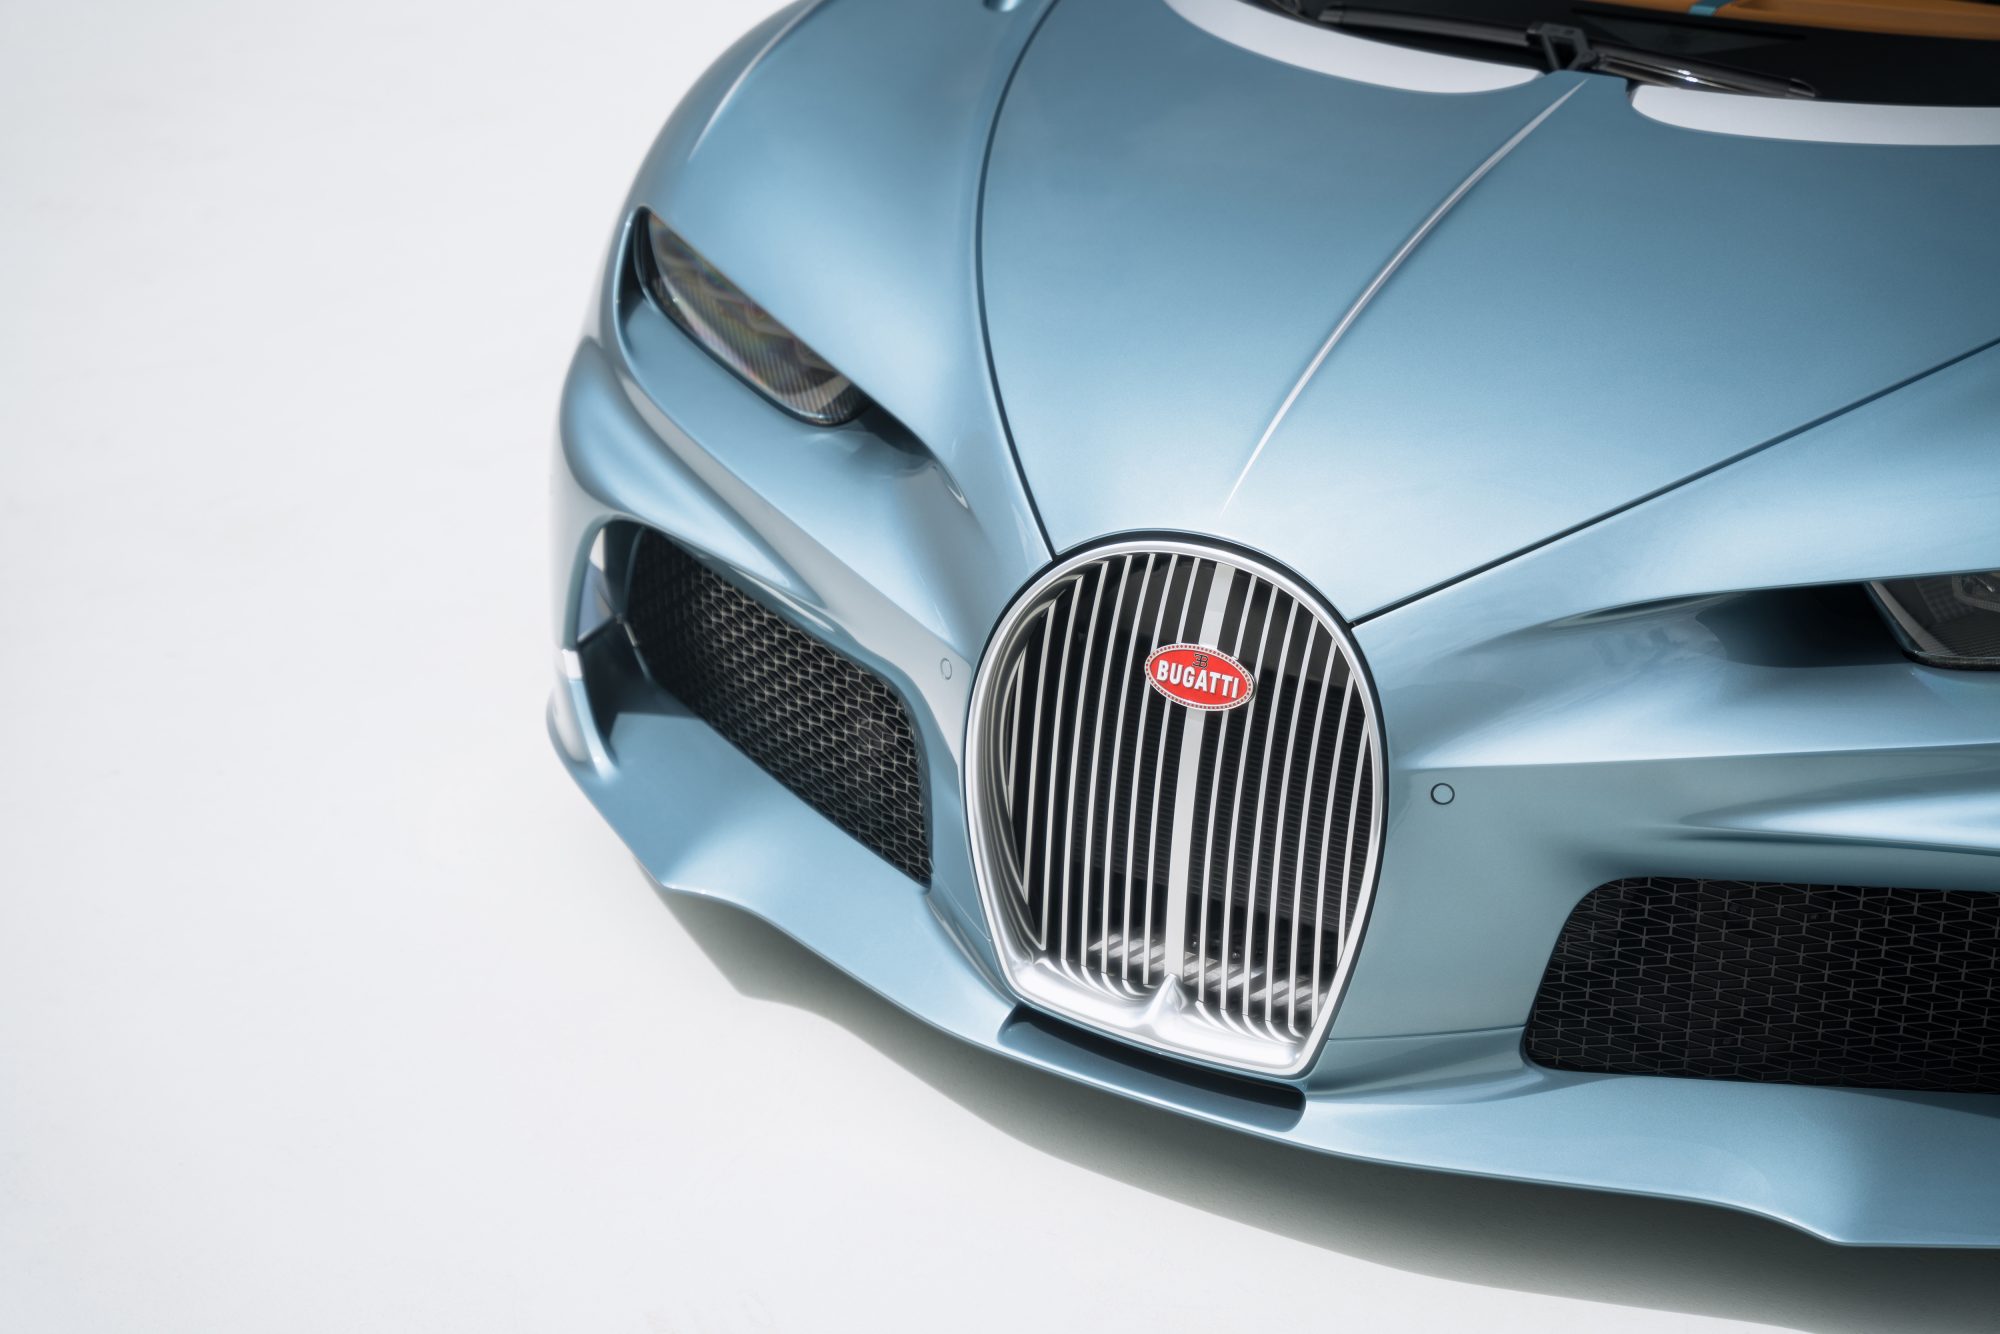 The Bugatti Chiron Super Sport ’57 One of One’ is a homage to an icon